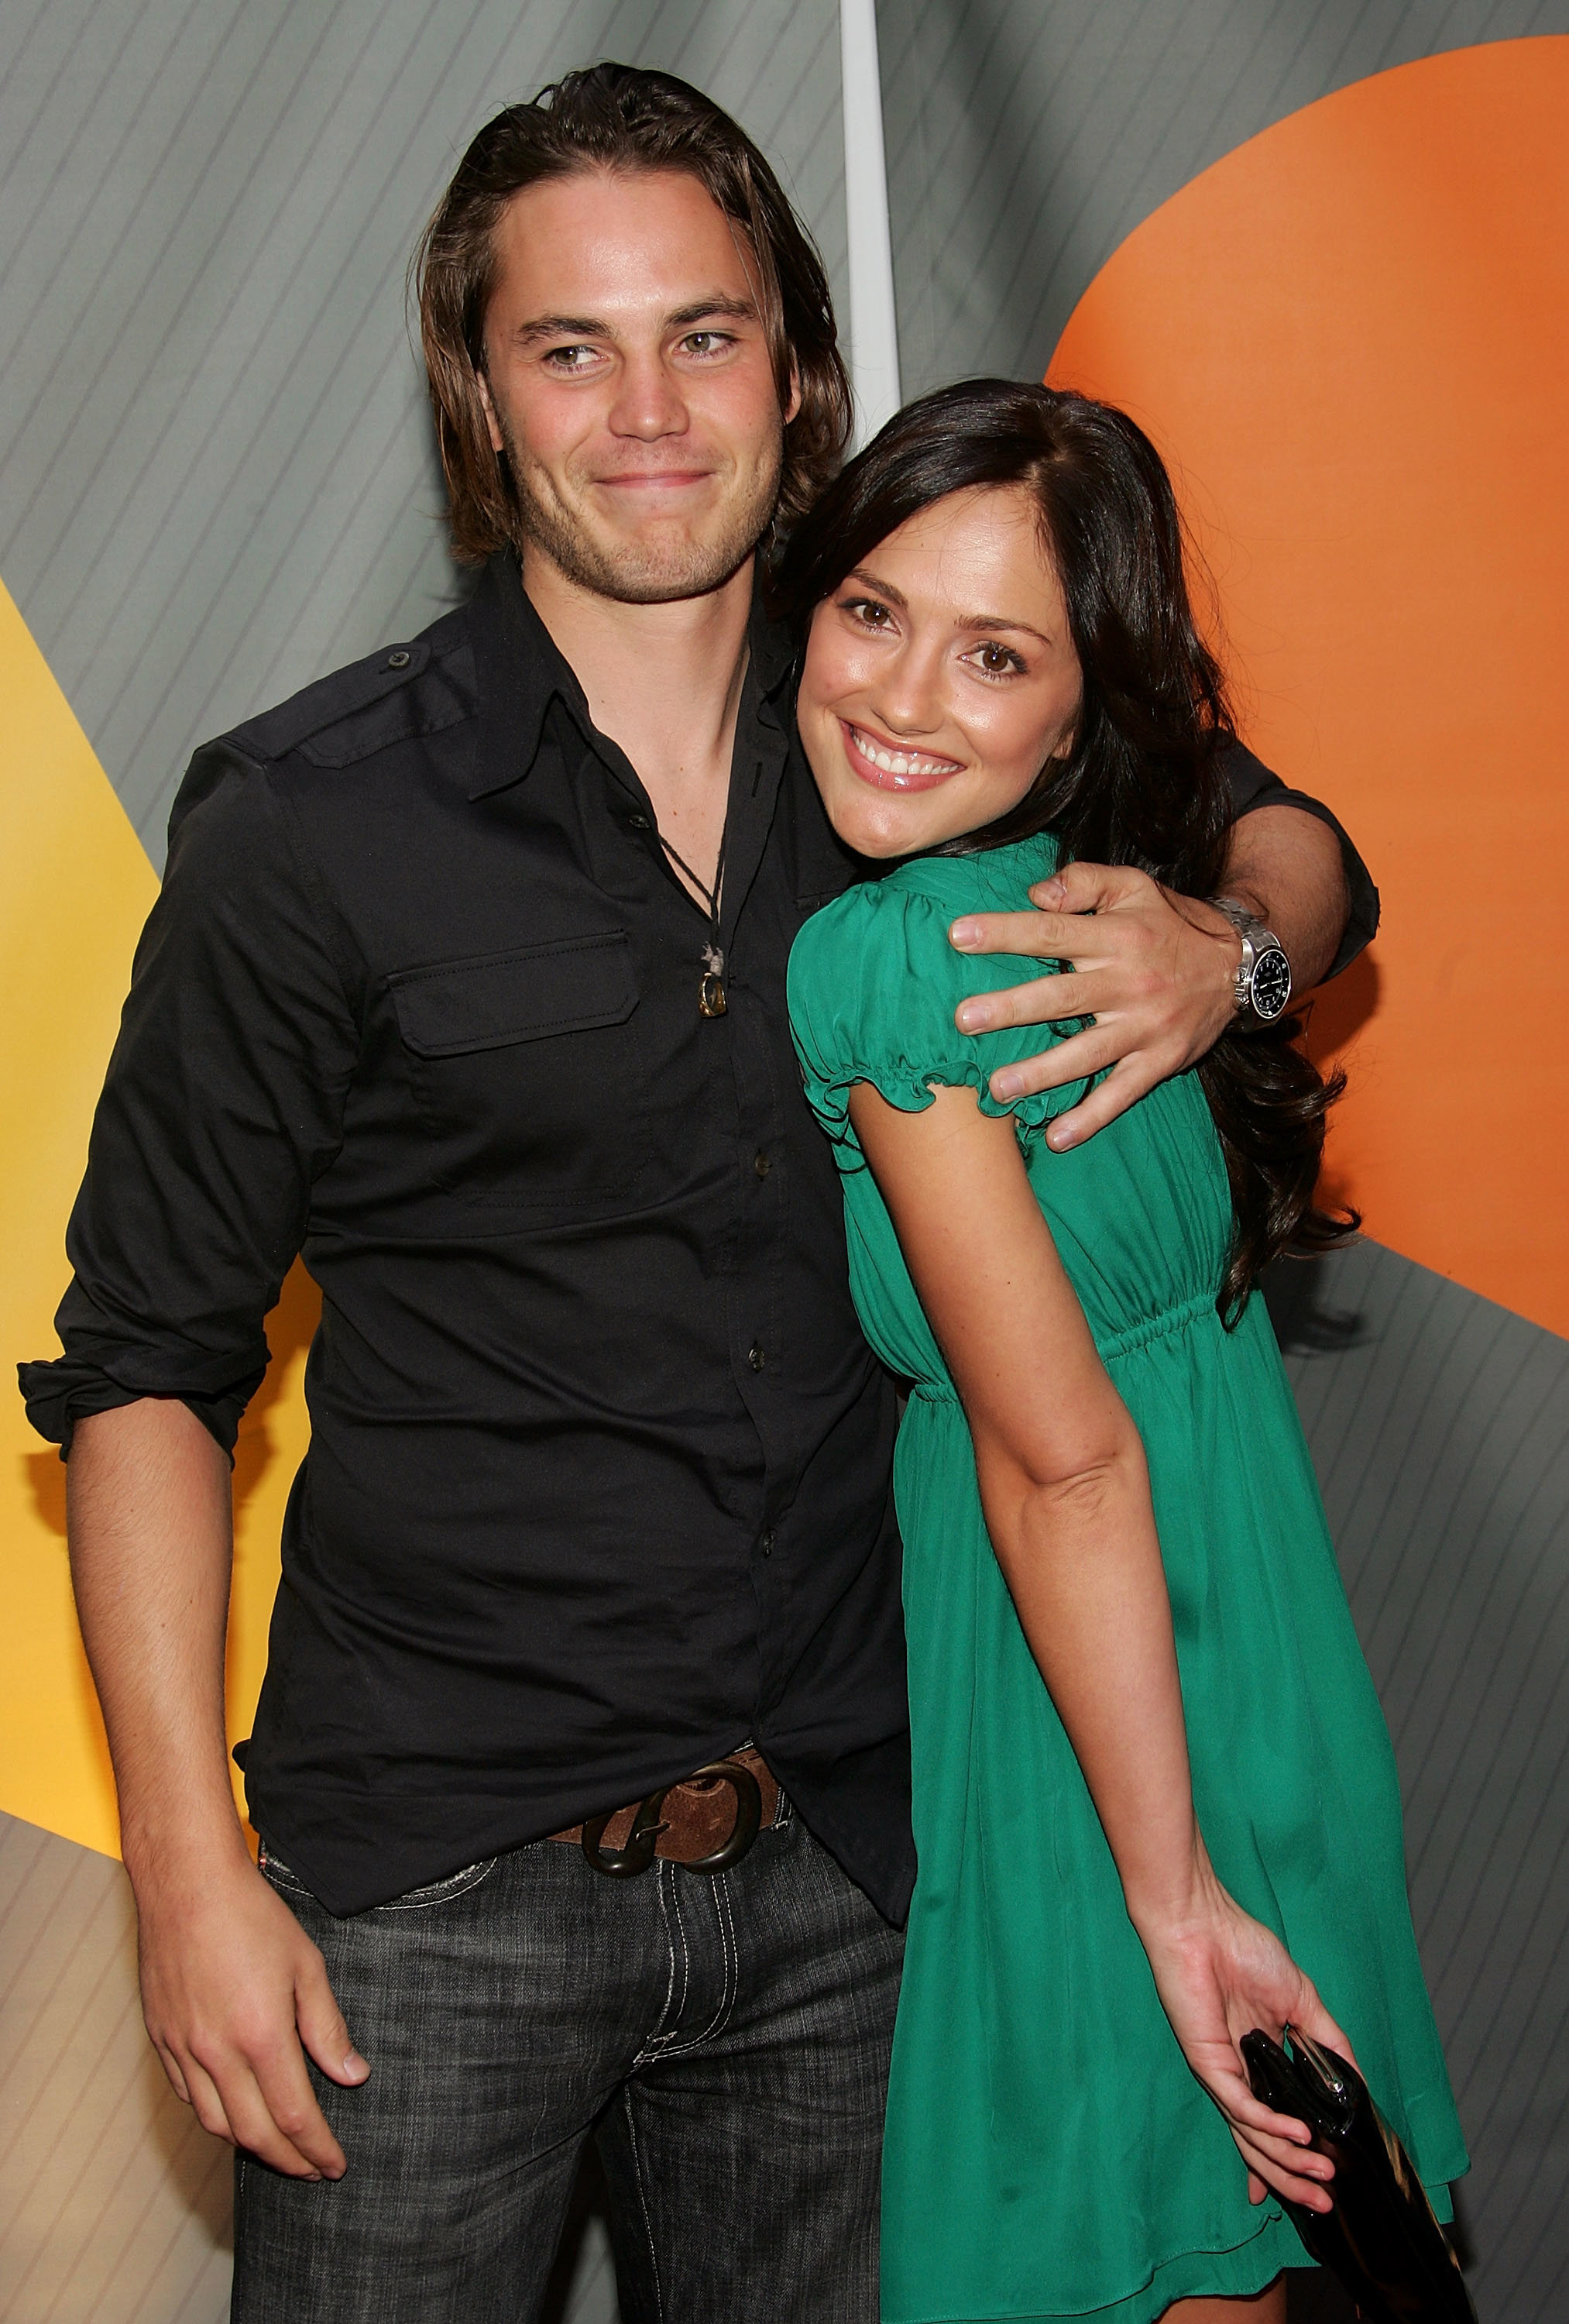 Minka Kelly and Taylor Kitsch attends the NBC Upfronts at Radio City Music Hall on May 14, 2007 in New York City.